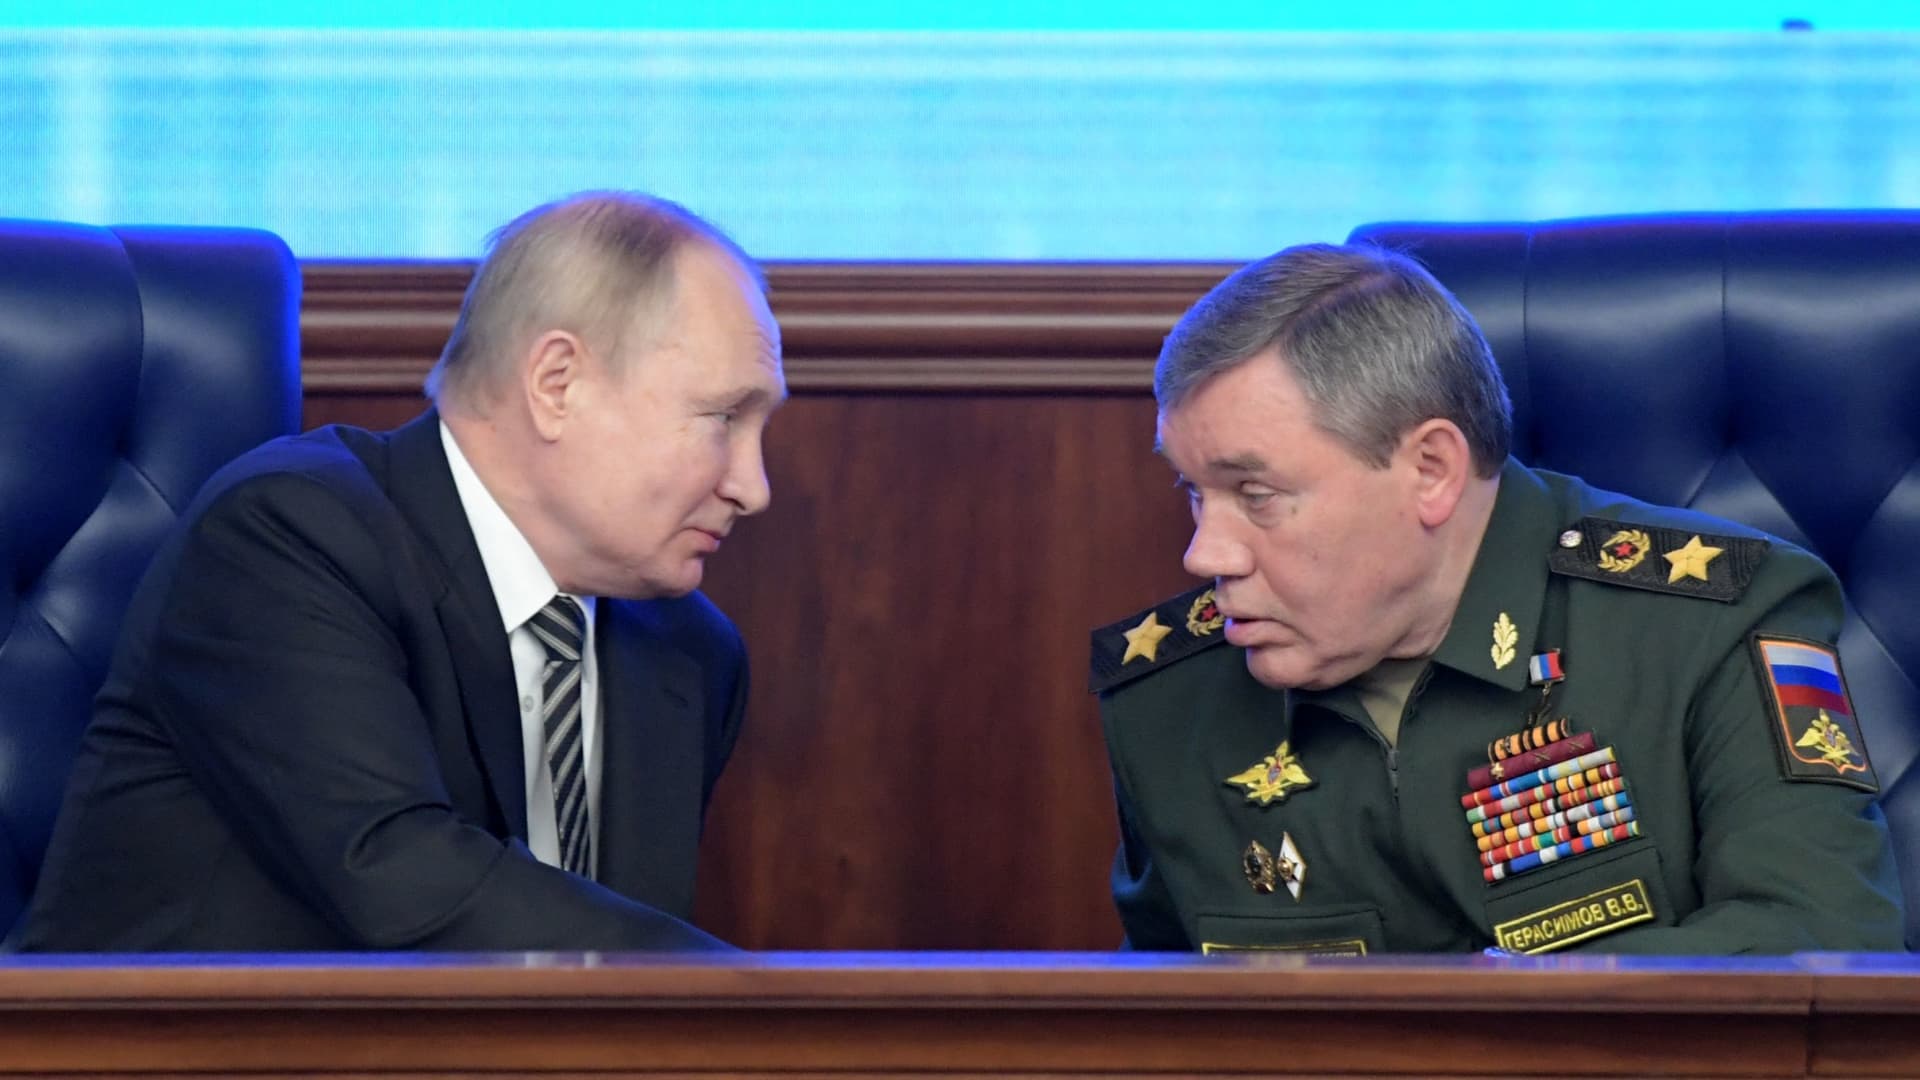 Russian Chief of the General Staff Valery Gerasimov, shown here with Vladimir Putin, has likely held onto his job but may have lost Putin's confidence, the British government says.